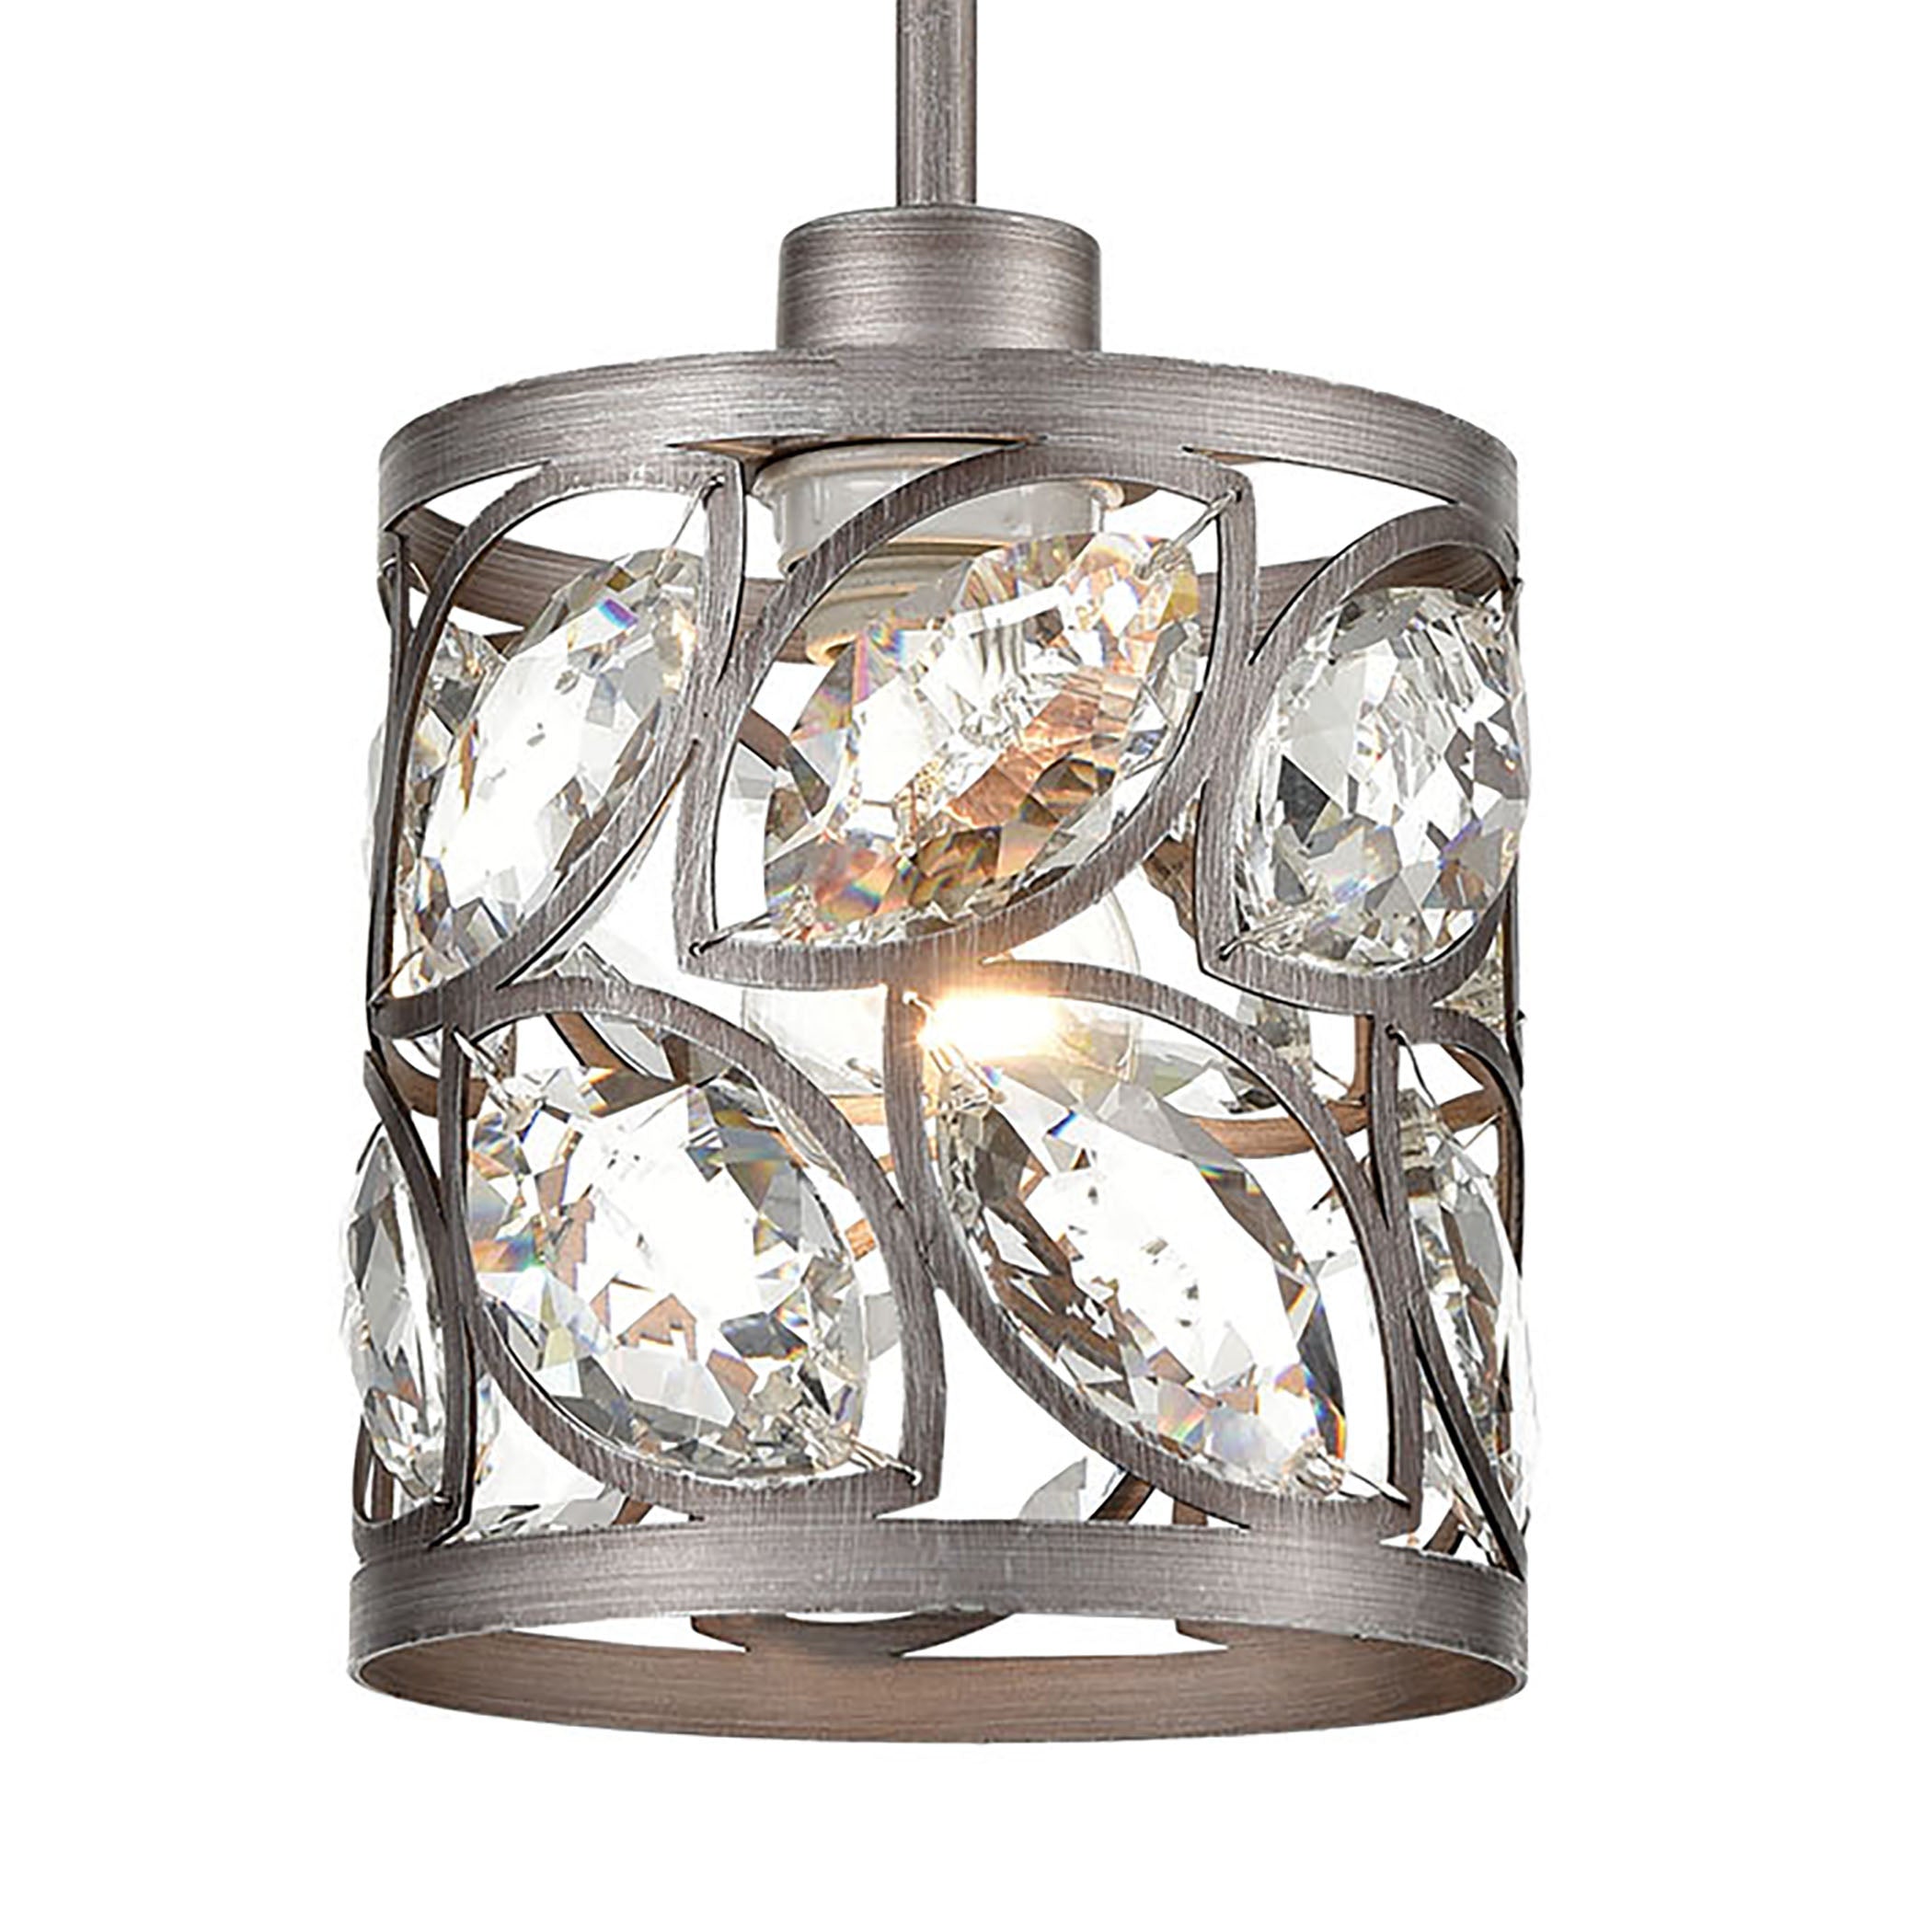 ELK Lighting 12245/1 Crisanta 1-Light Mini Pendant in Weathered Zinc with Clear Crystal